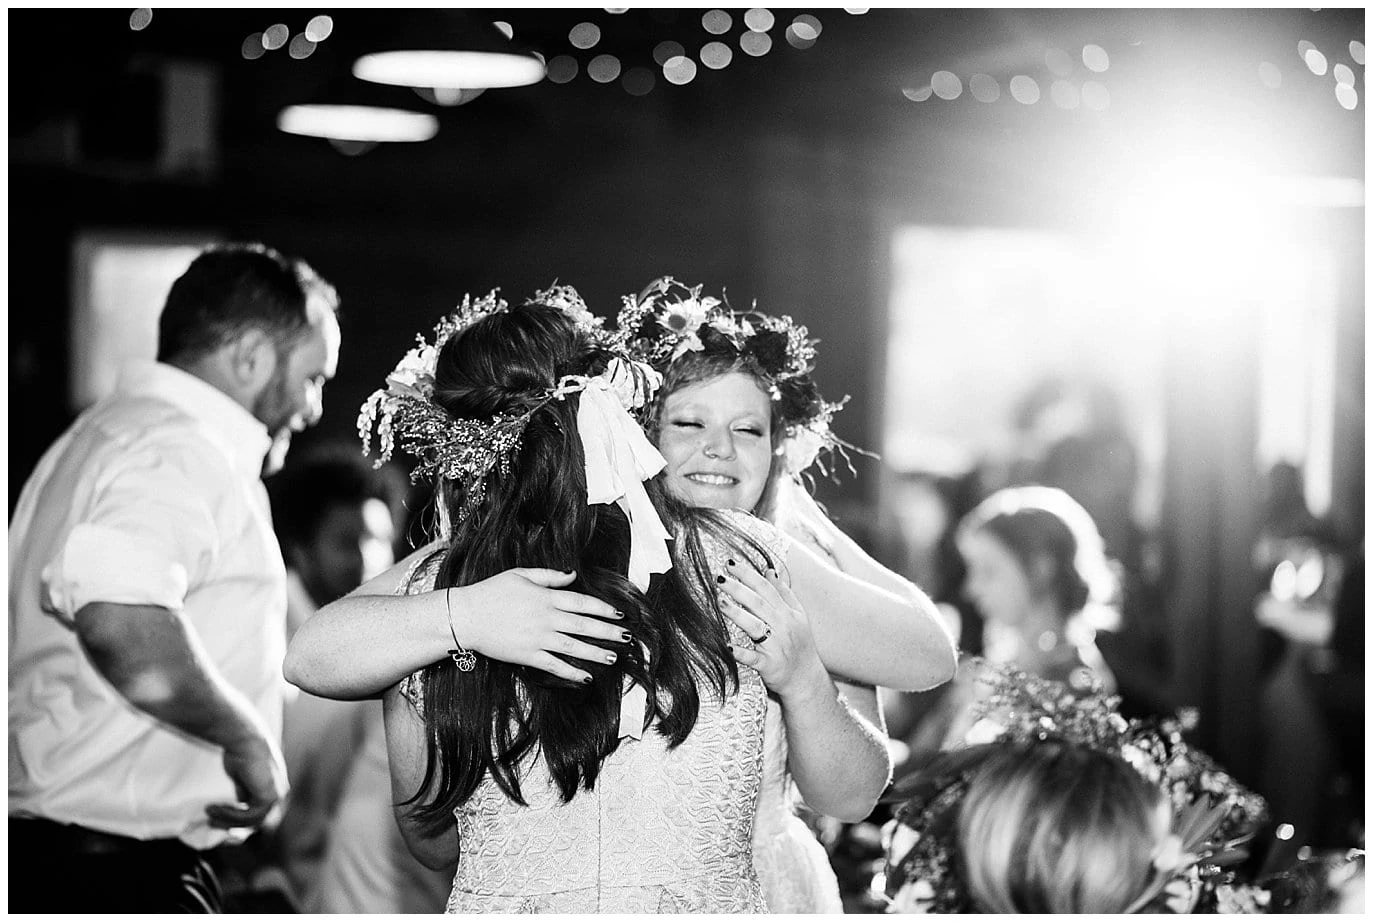 bride hugging maid of honor after wedding toast at Denver Botanic Gardens at Chatfield Summer Wedding by Chatfield Farms wedding photographer Jennie Crate photographer